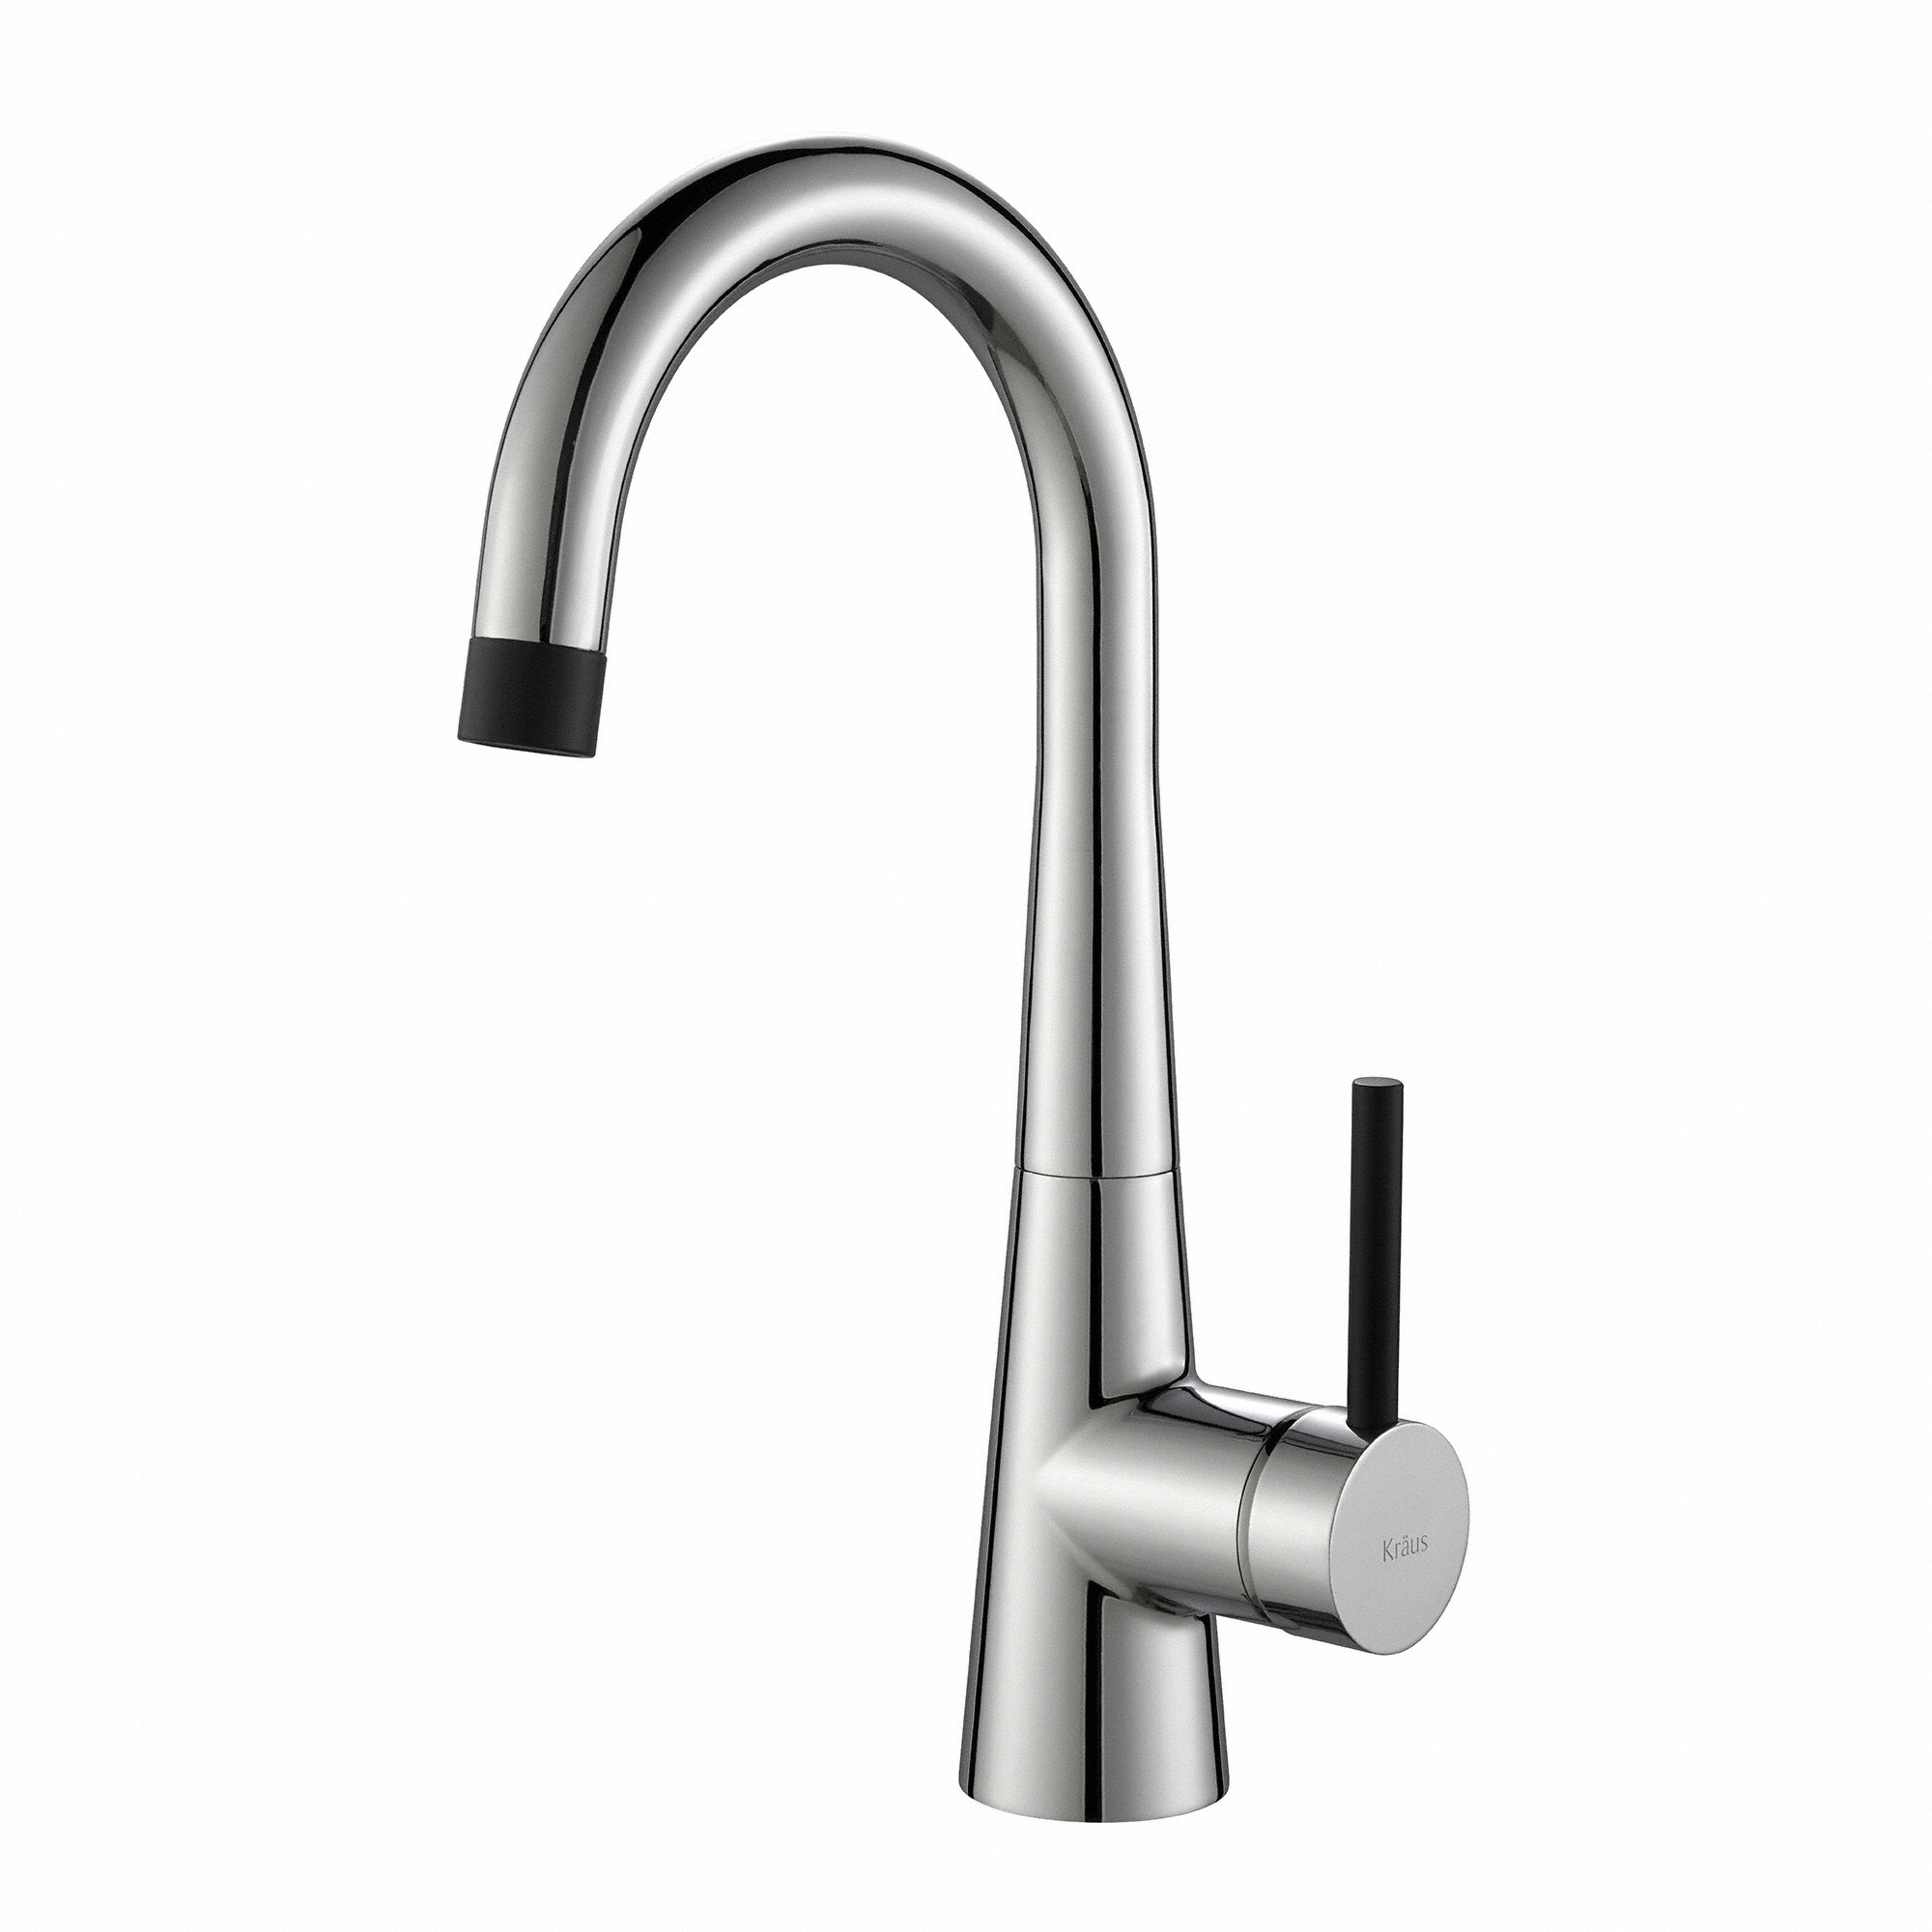 Kraus KPF2700CH Single Handle Kitchen Bar Faucet with 5 15/16 Inch